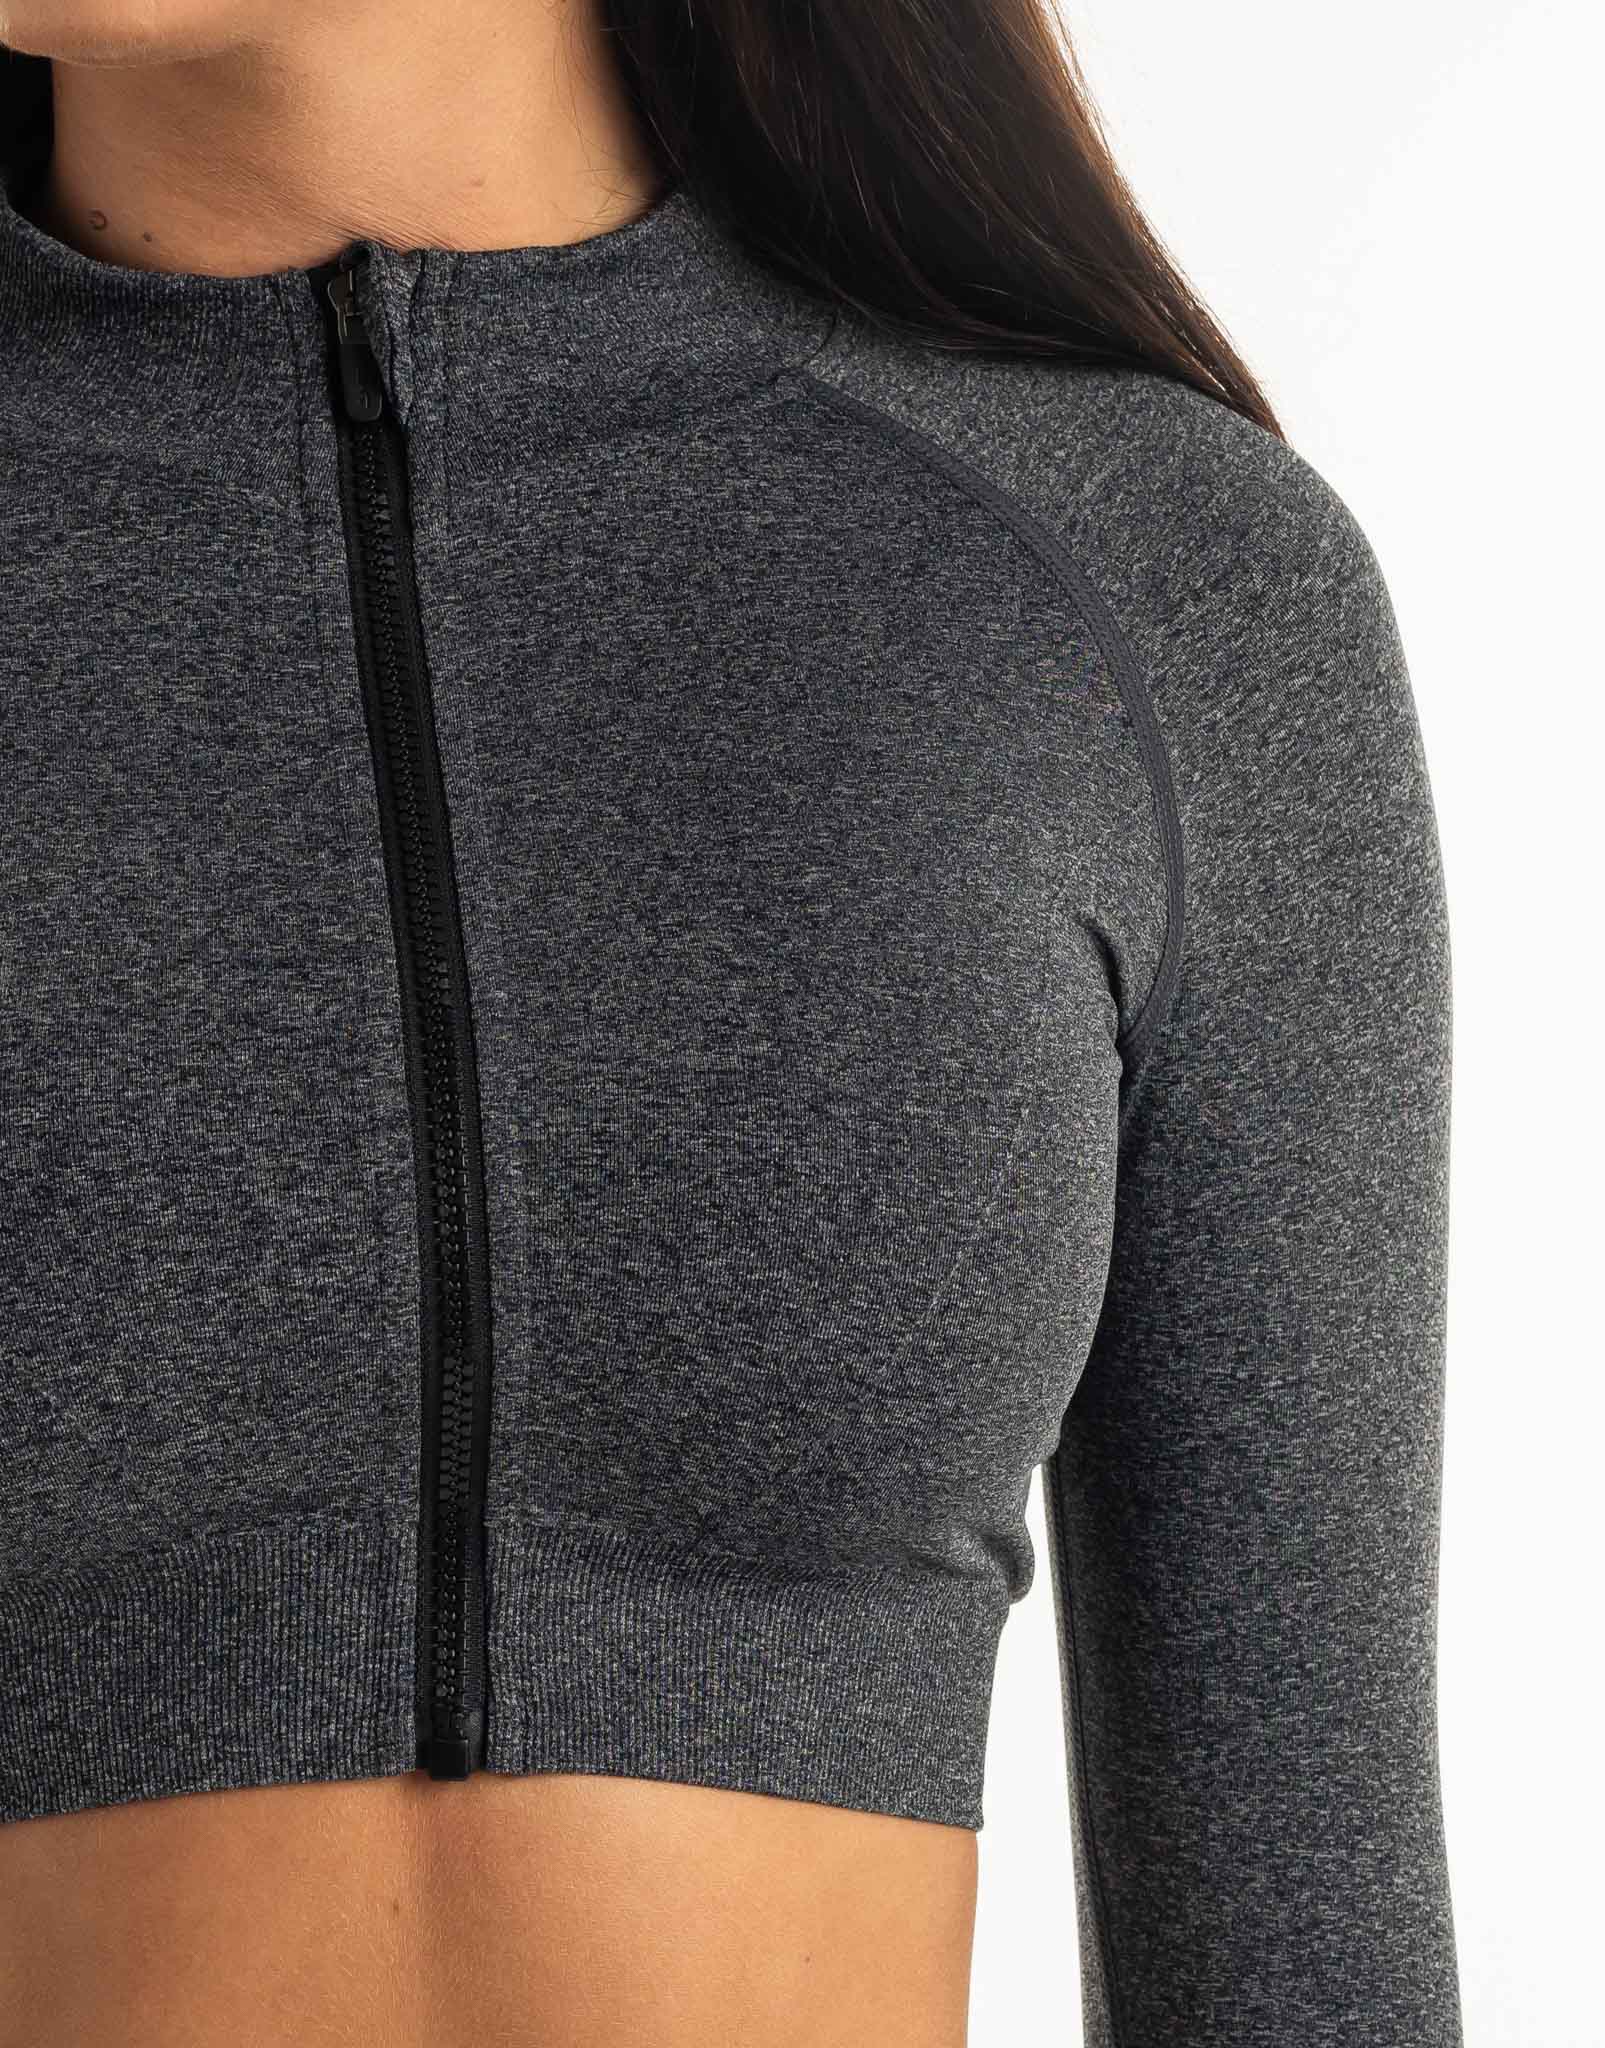 League Cropped Zip-Up - Charcoal